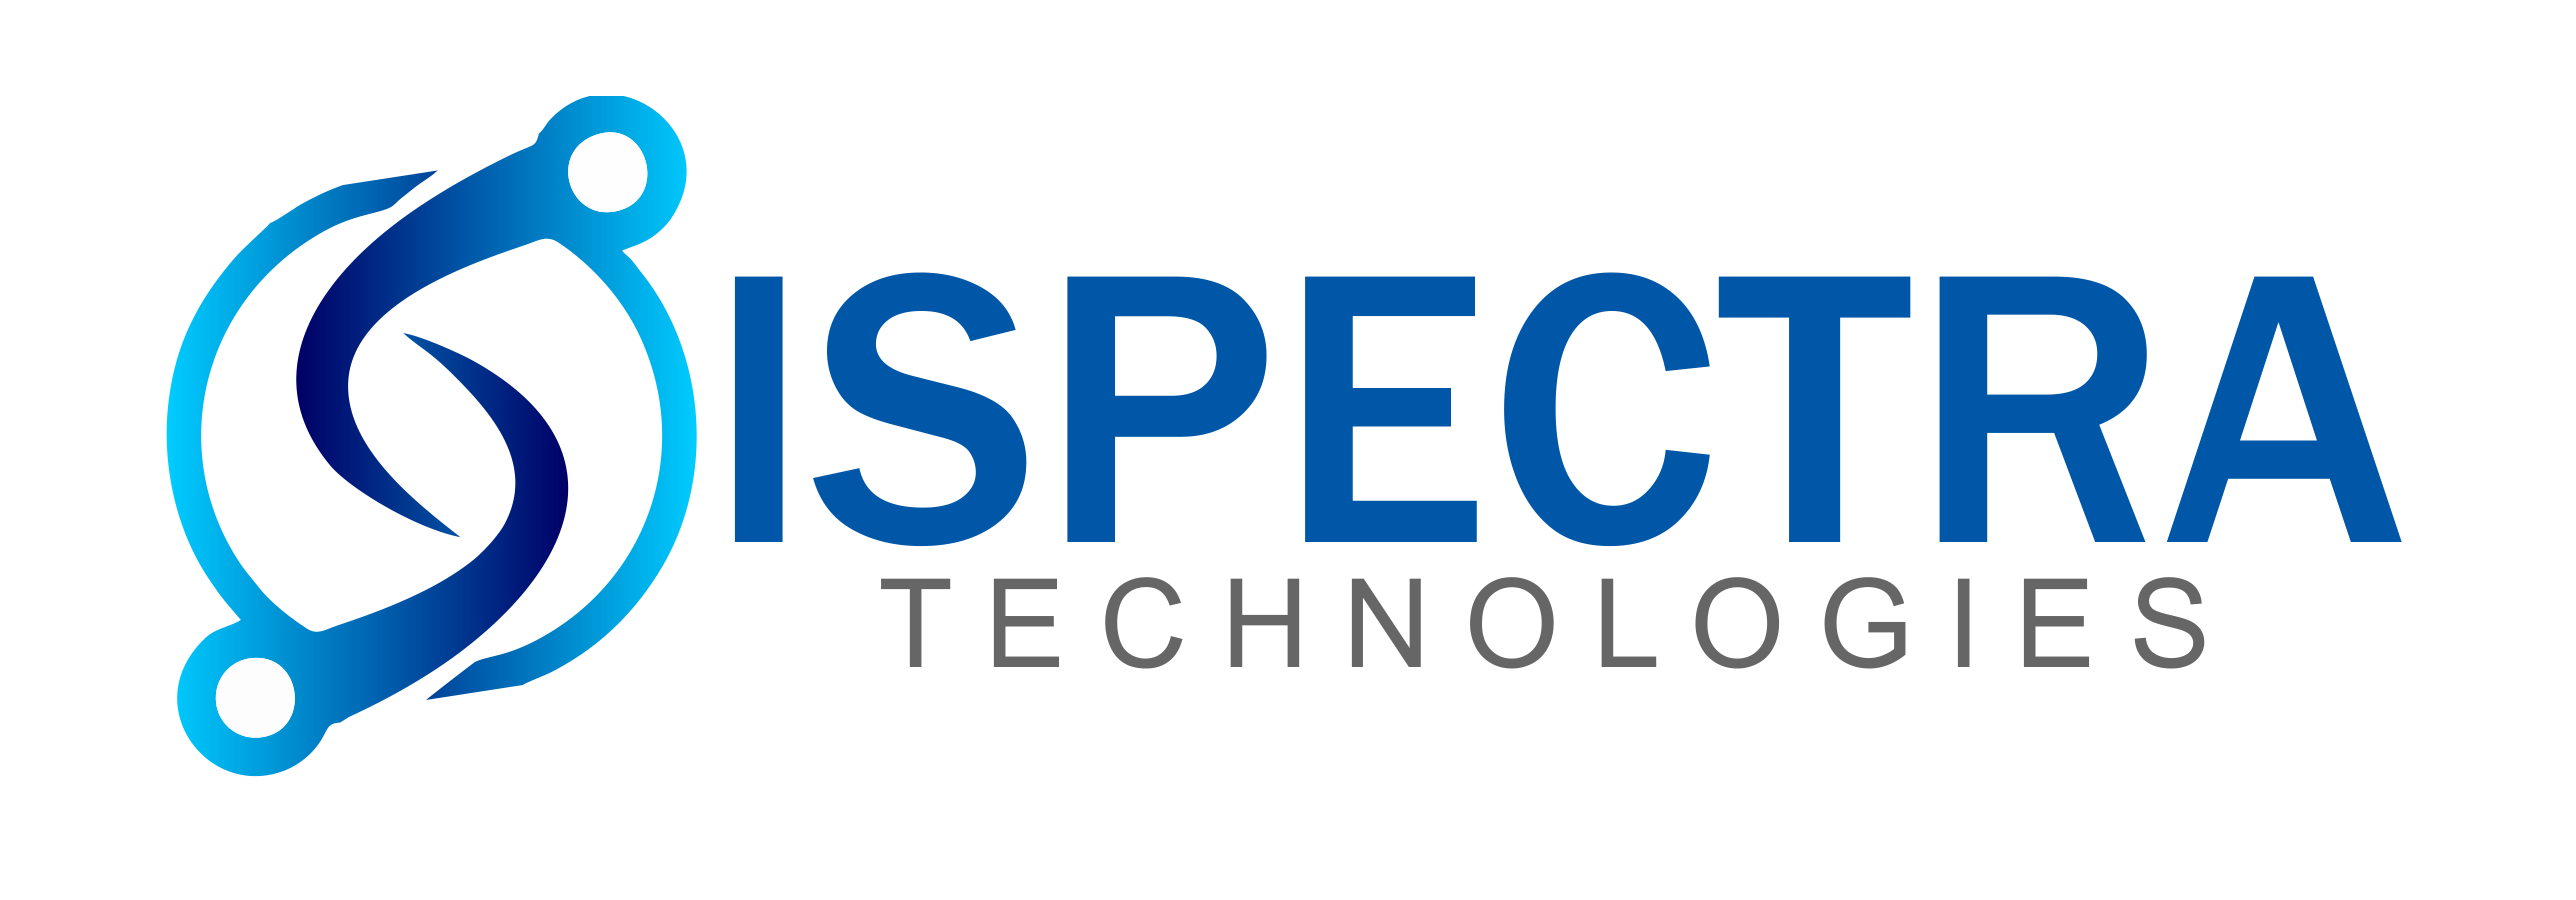 Cyber security Excellence through Virtual CISO Advisory - ispectra